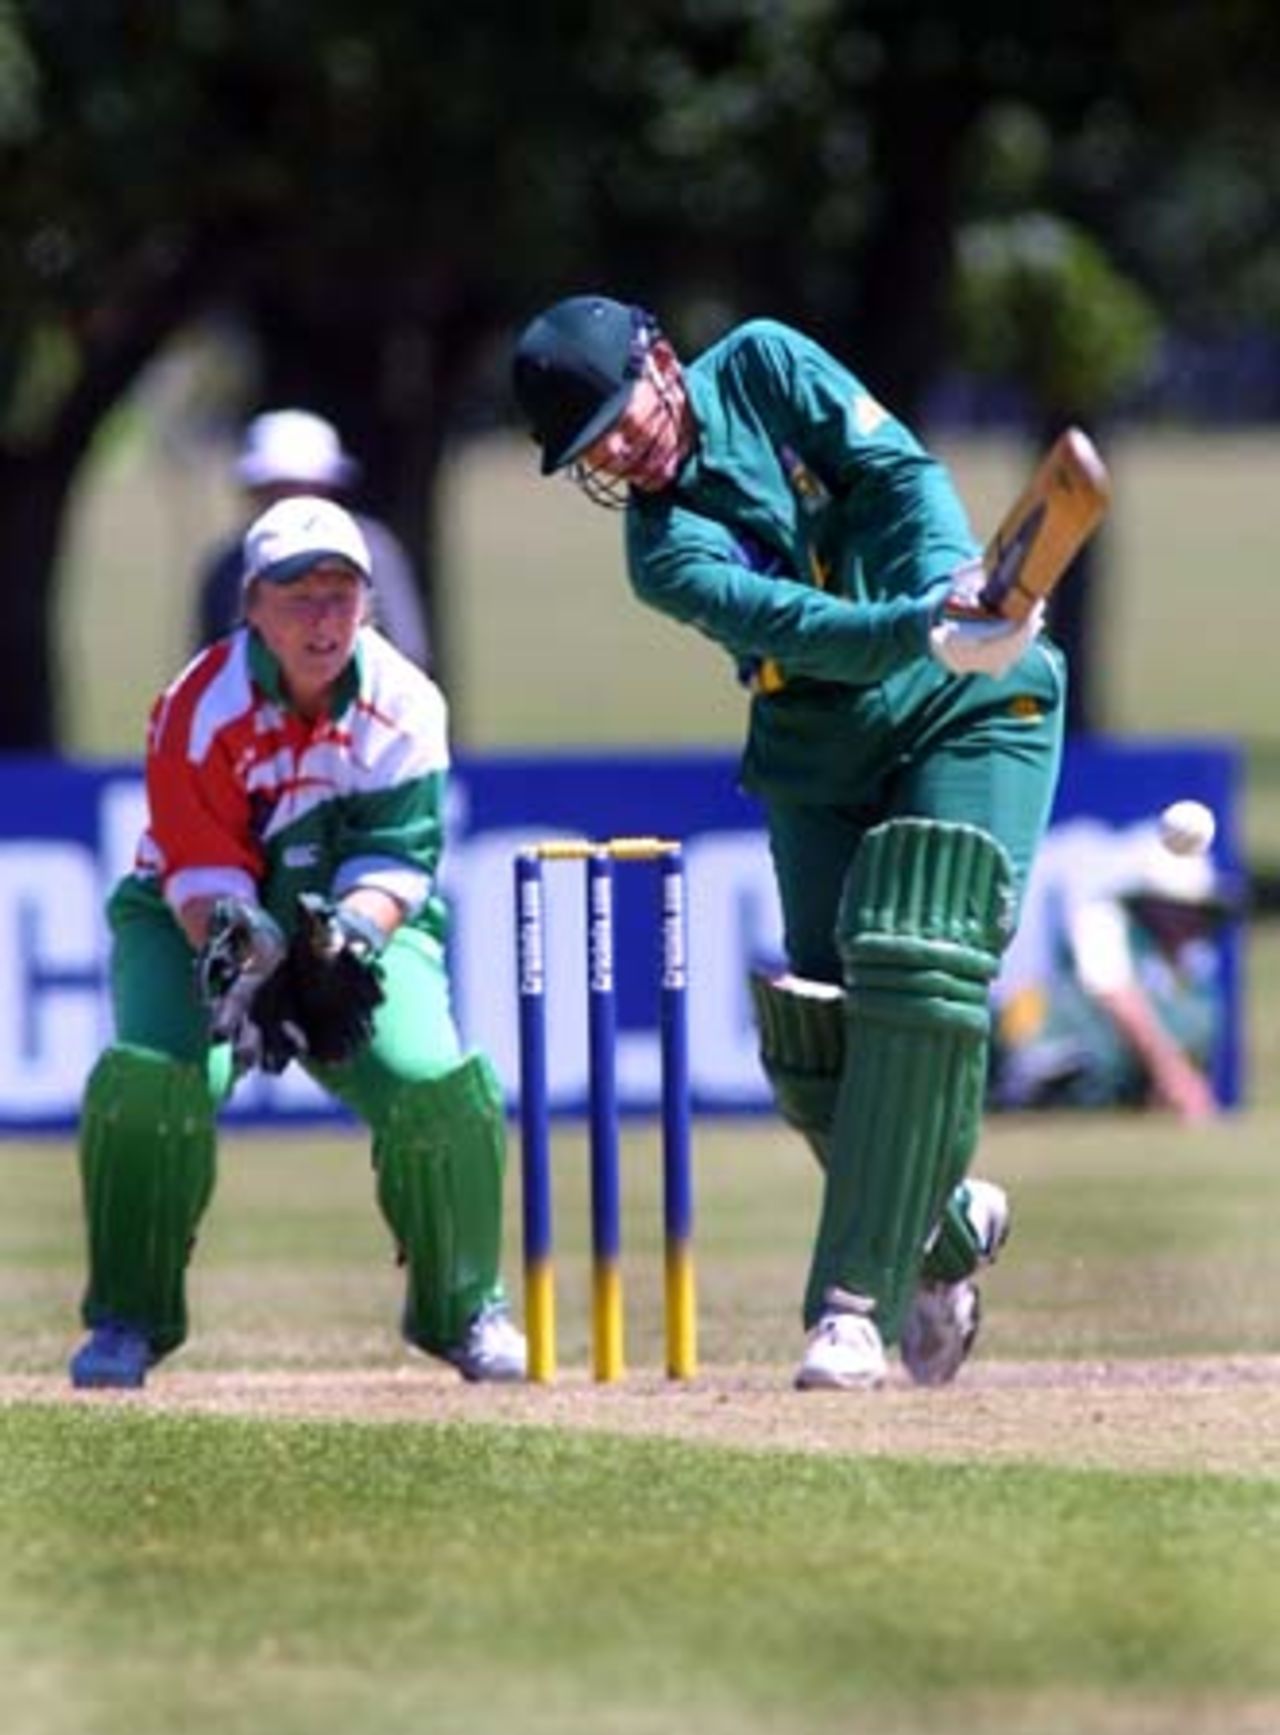 Ireland v South Africa at the 2000 Women's World Cup , played at the Hagley Oval ,16th December